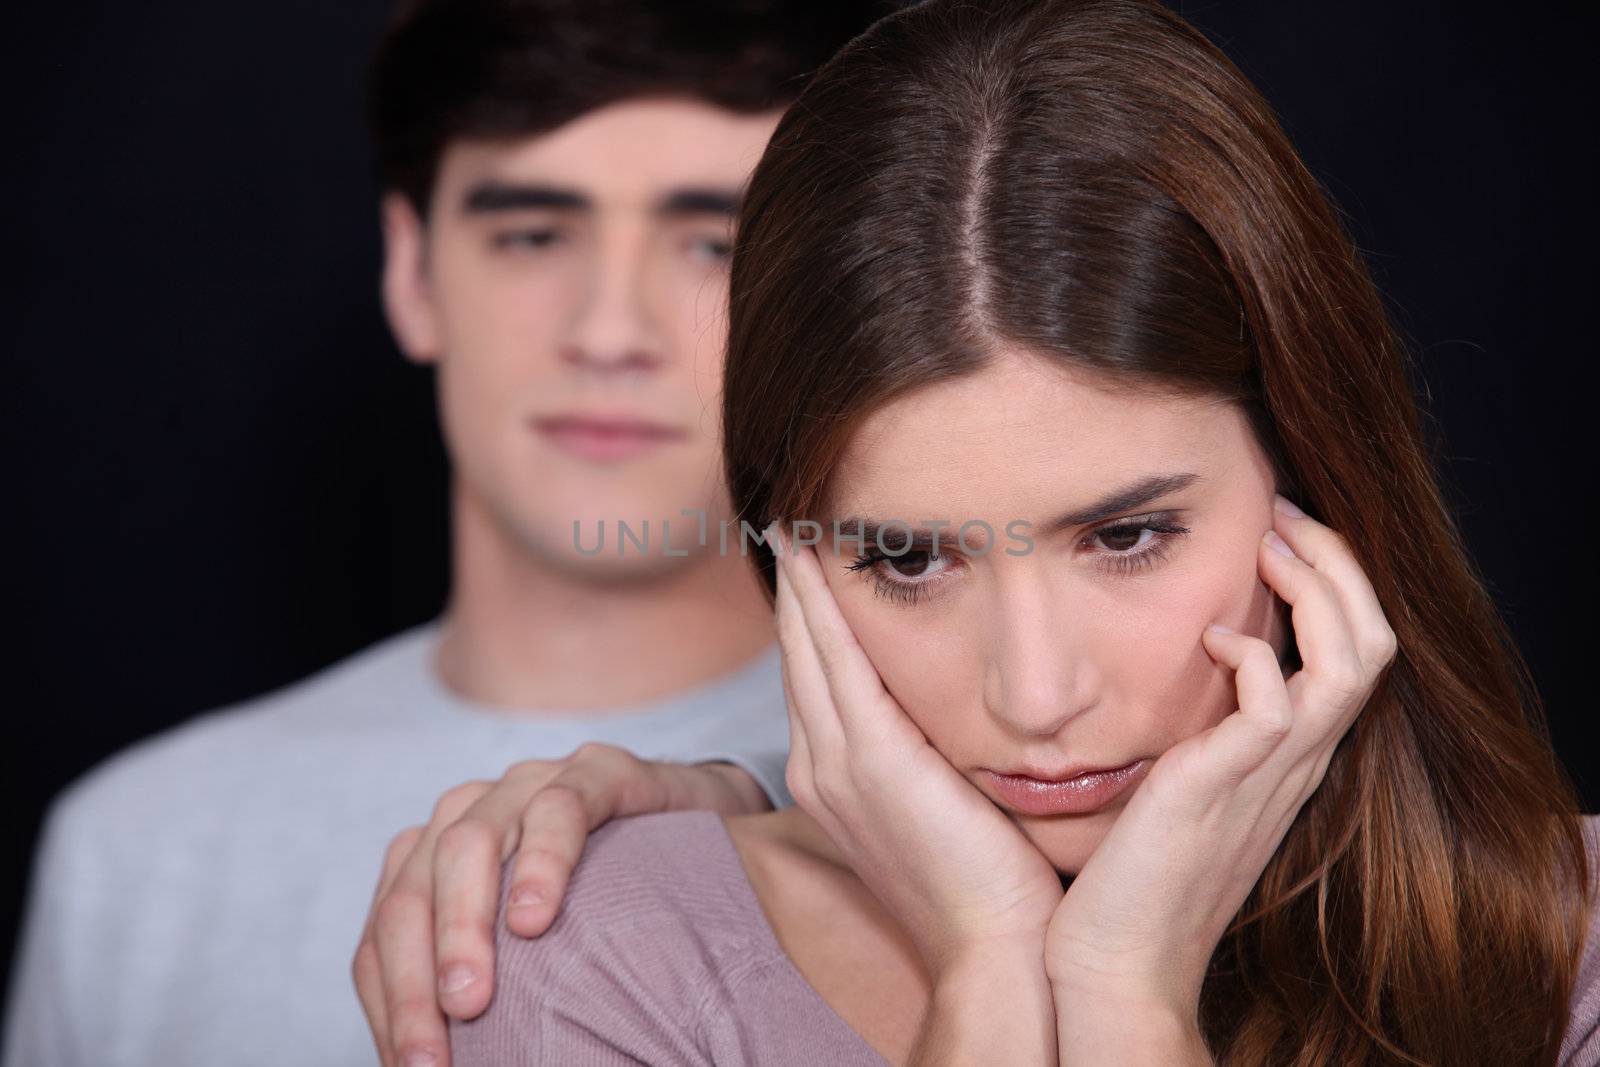 Man consoling girlfriend by phovoir